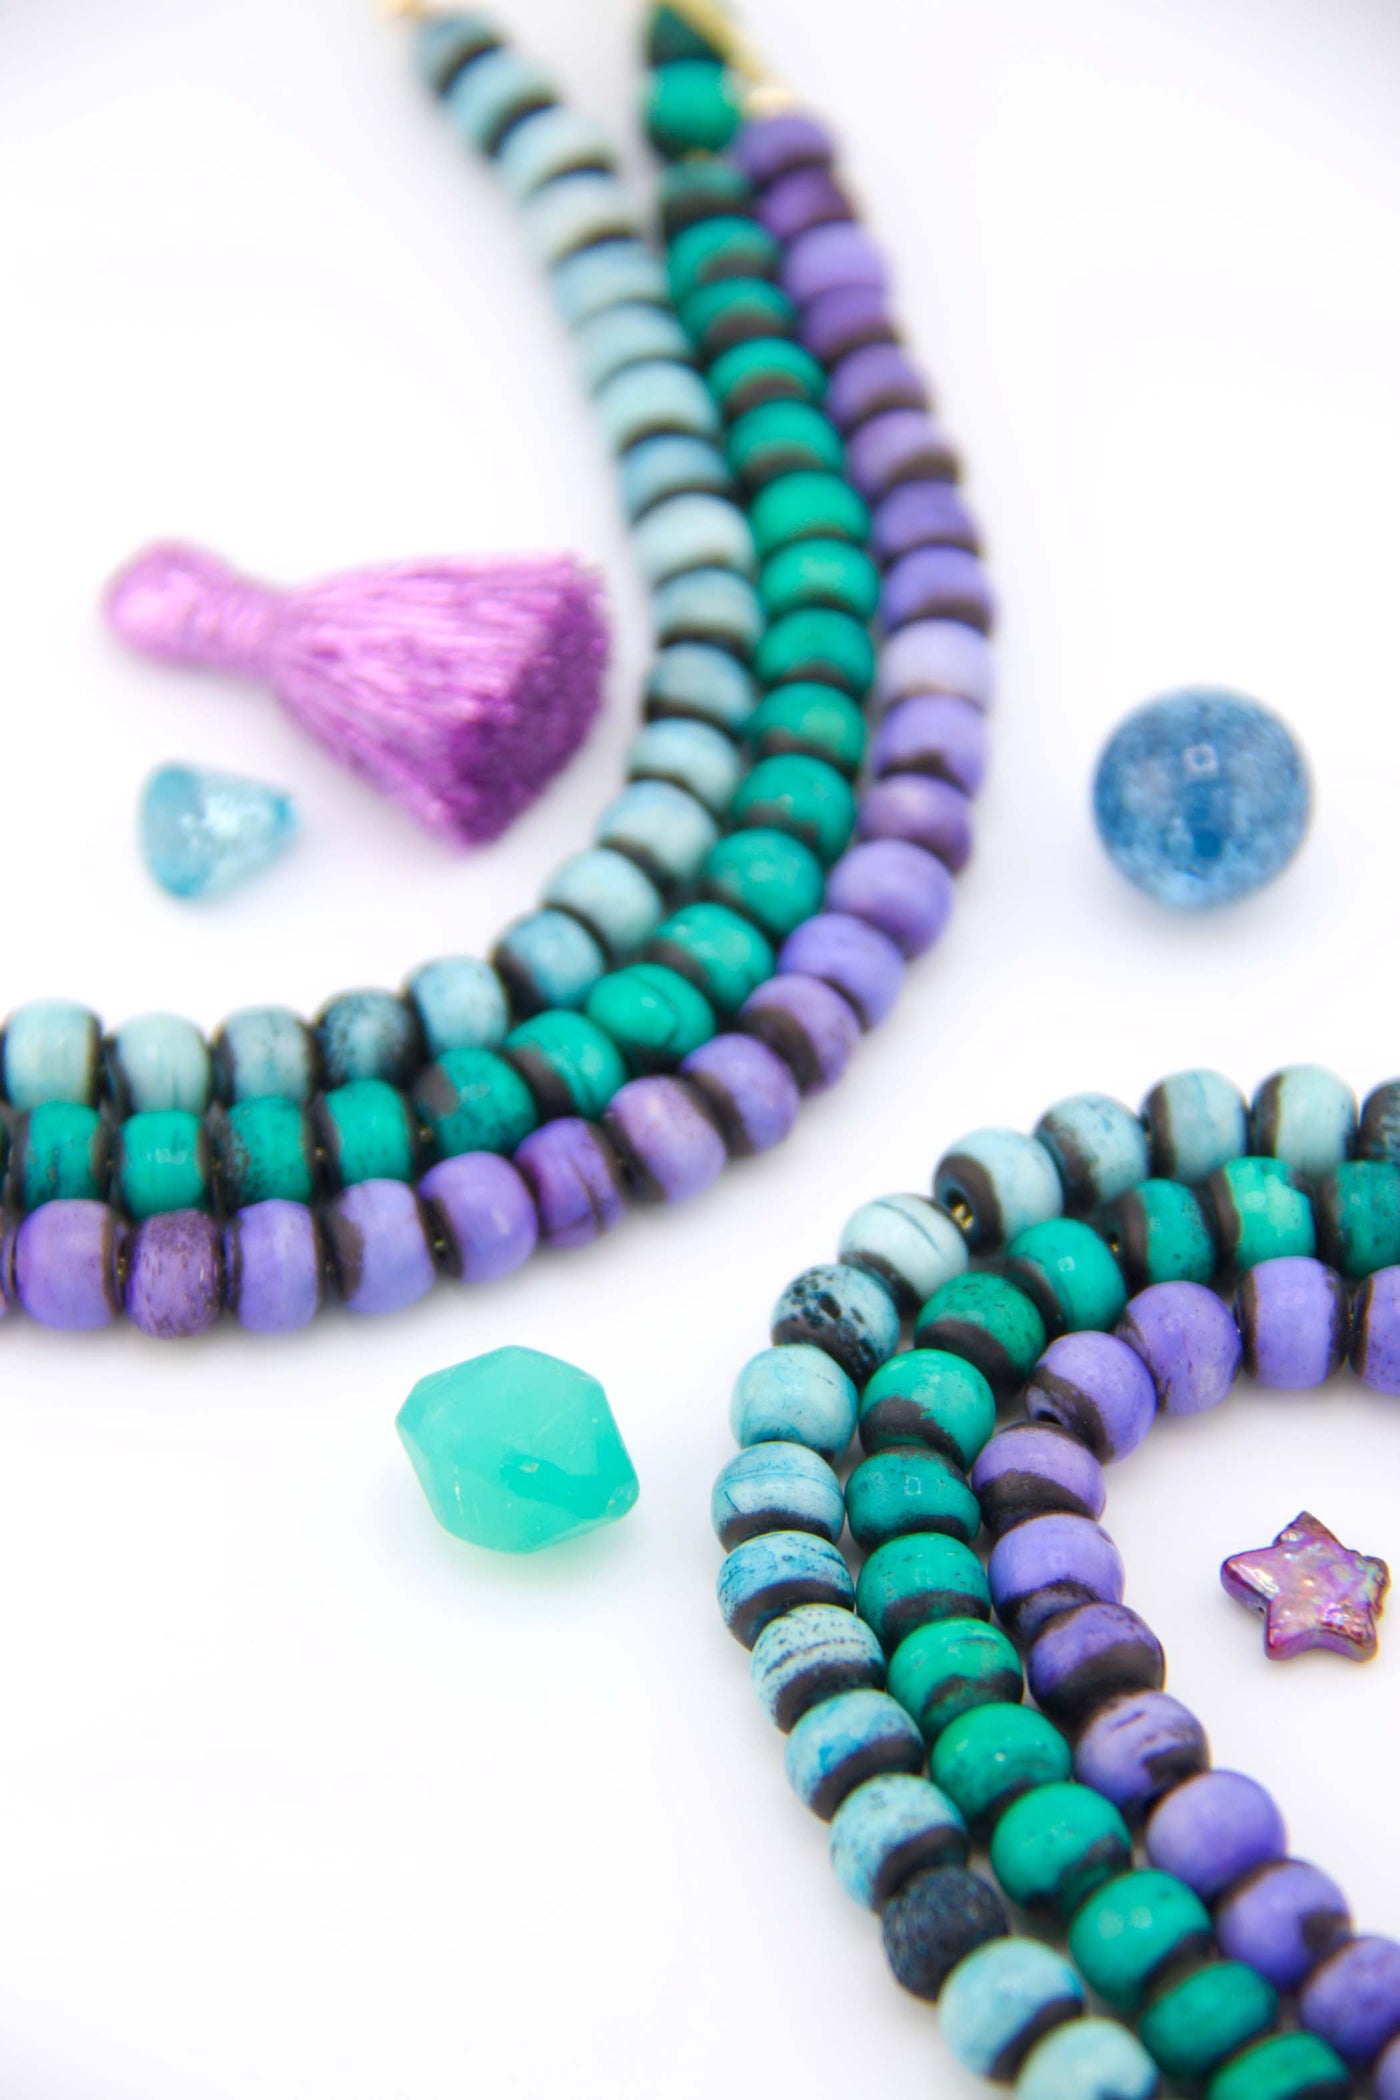 Dive into the ethereal beauty of the night sky with our Aurora Borealis Inspired Beads in shades 